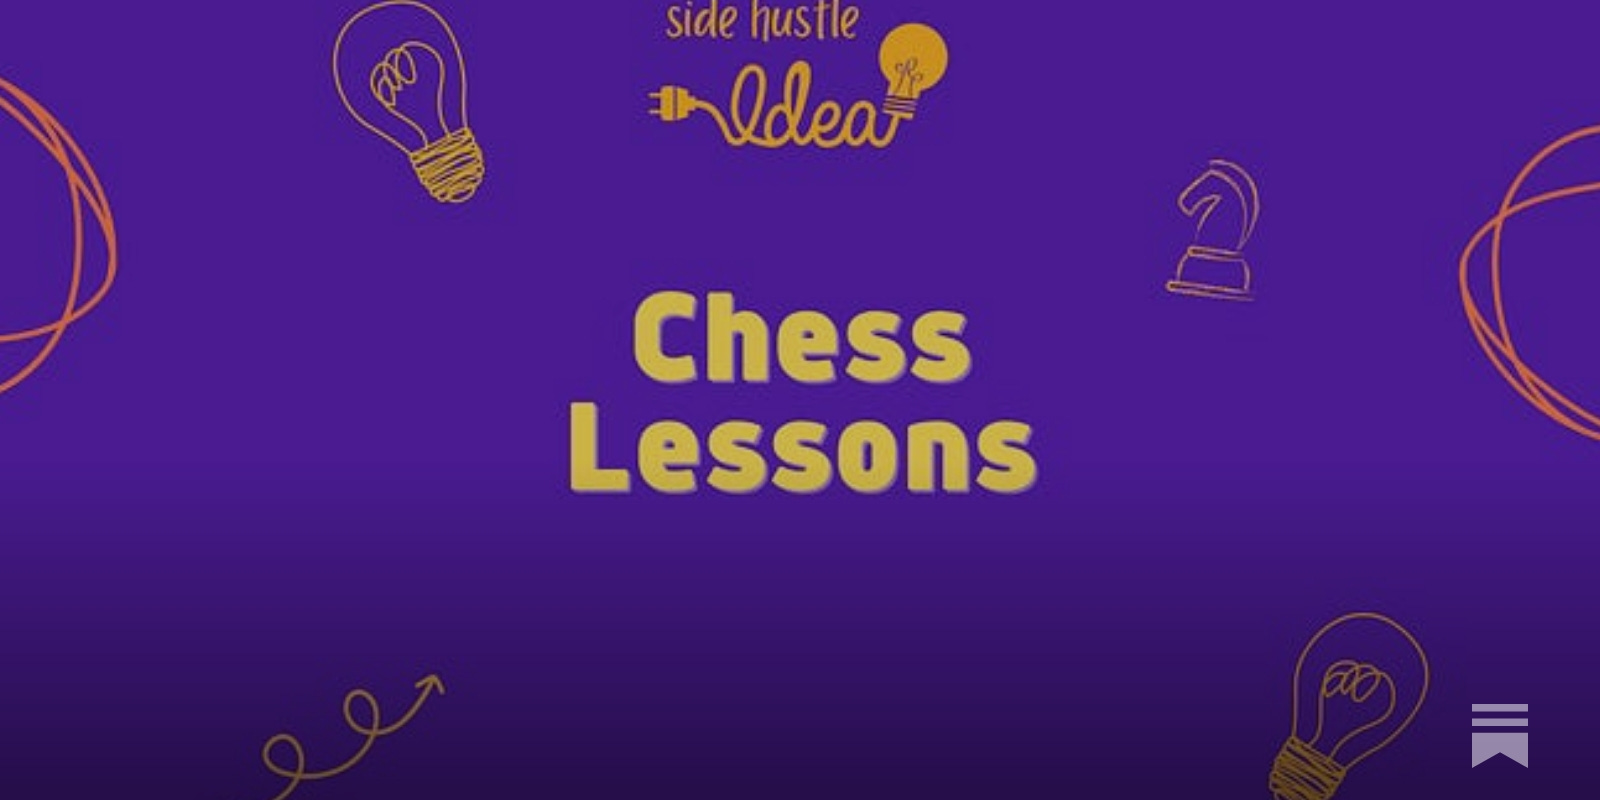 How to coach online (part 2) (ChessTech News)